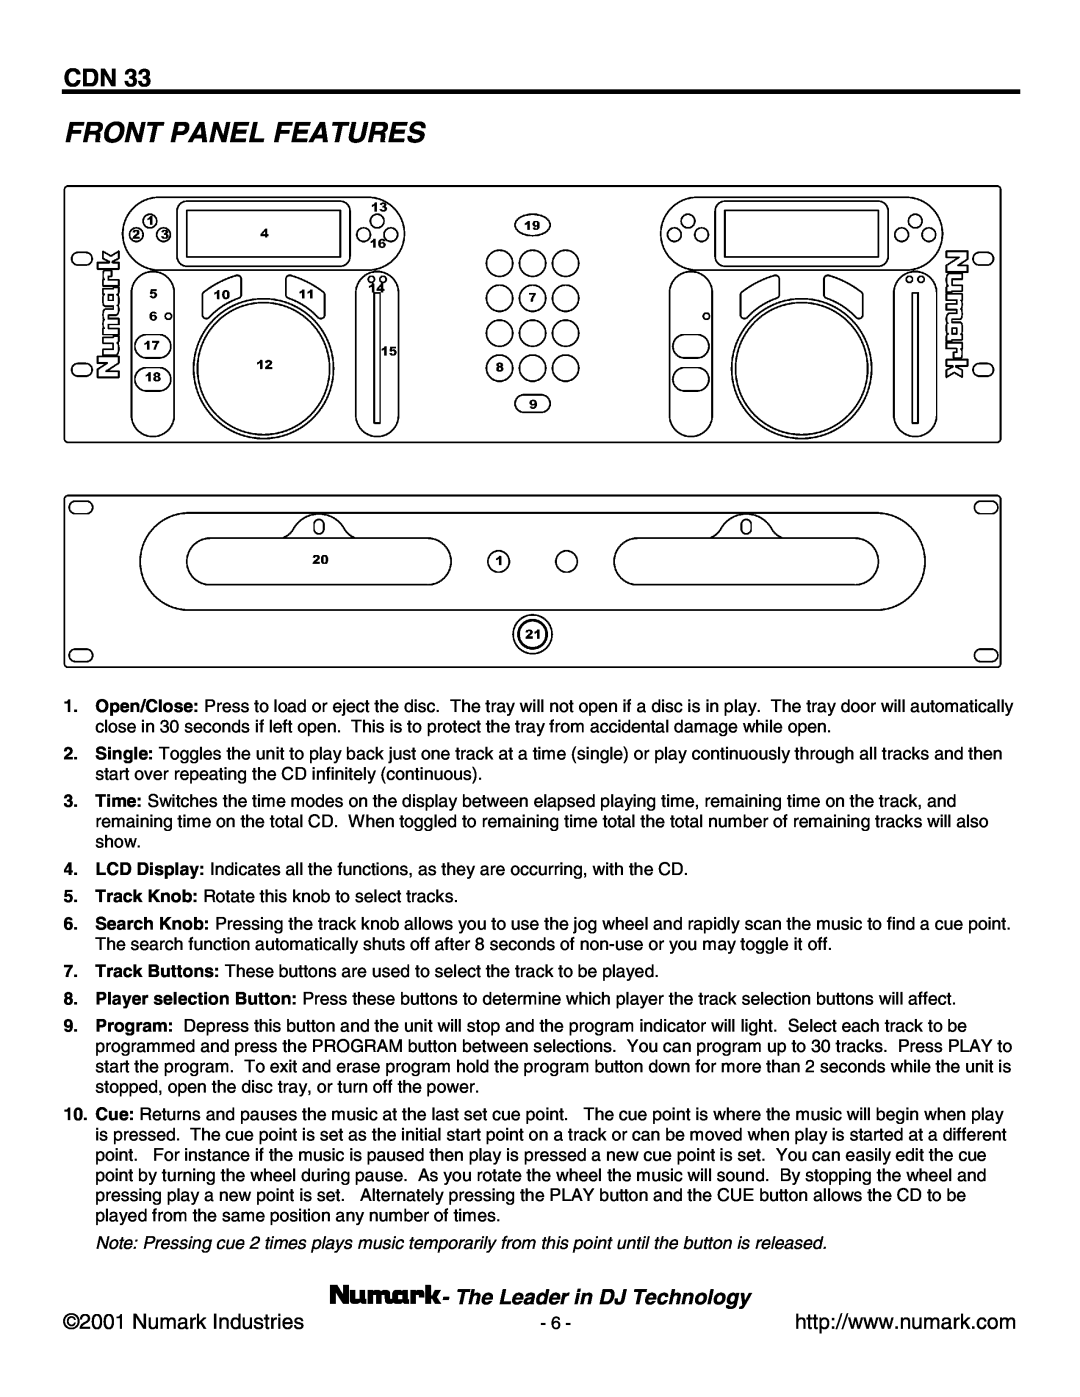 Numark Industries CDN 33 manual Front Panel Features, Numark Industries, The Leader in DJ Technology 